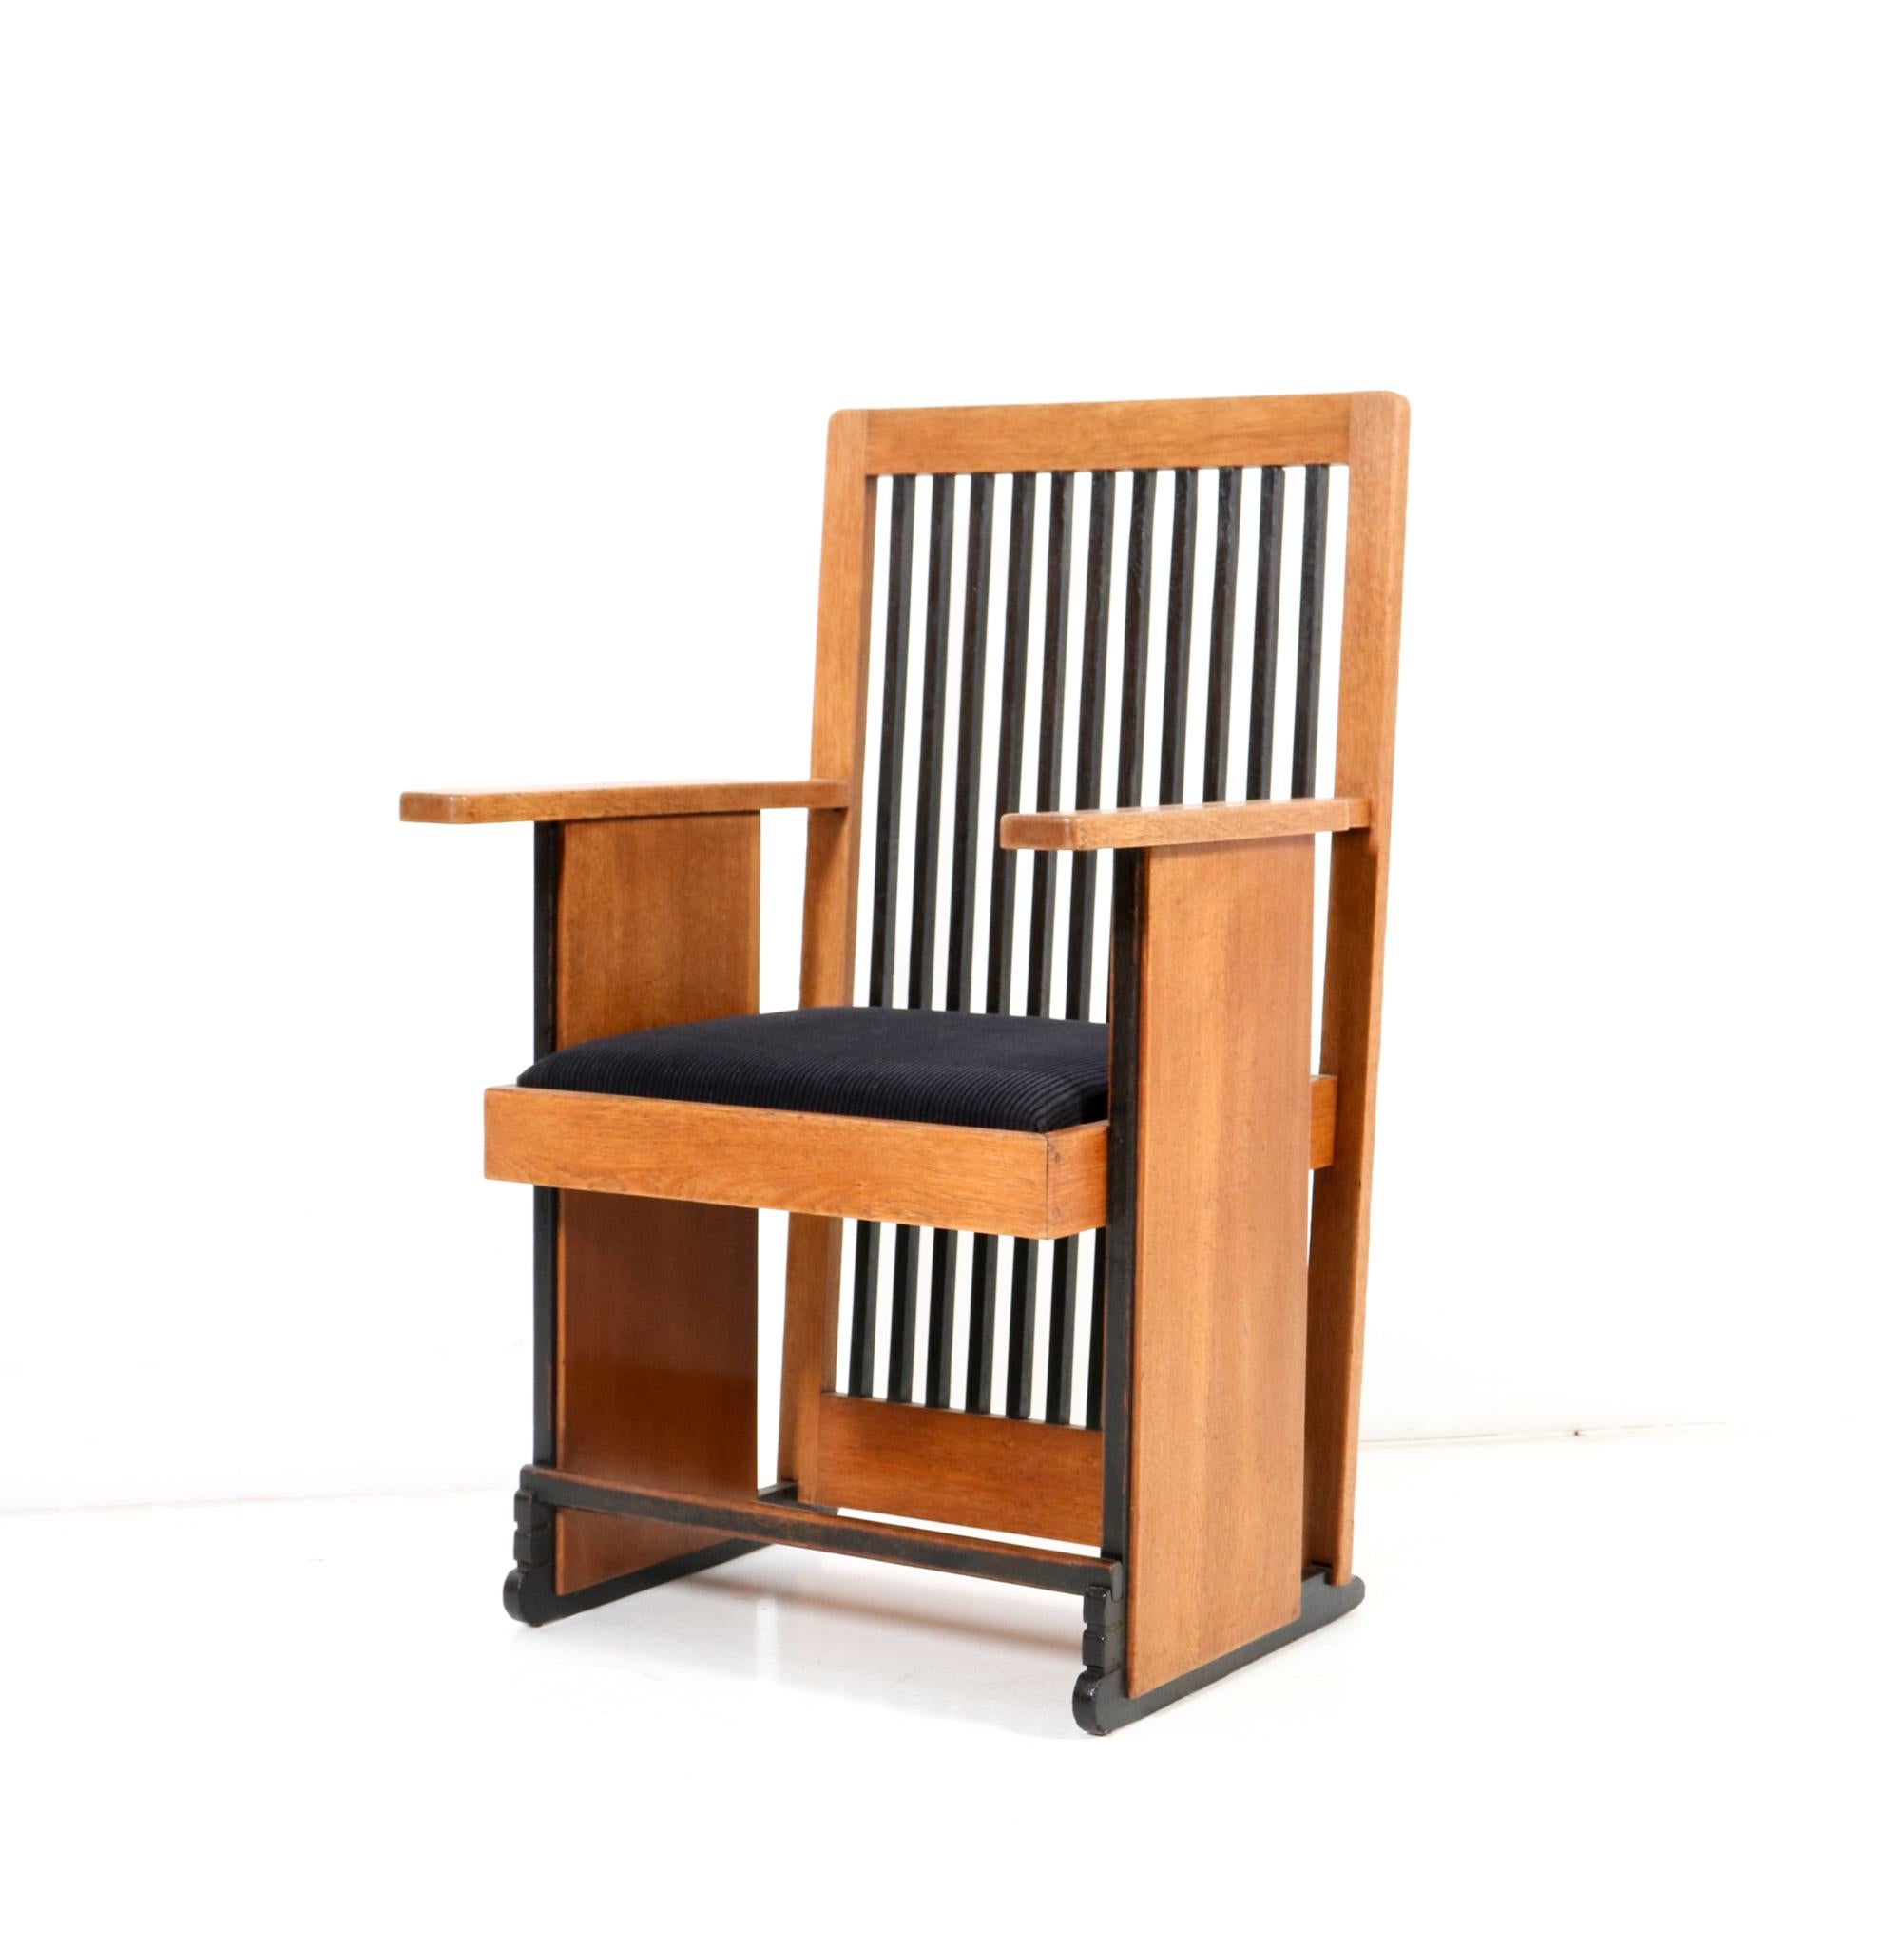  Oak Art Deco Modernist High Back Dining Room Chairs by Architect Caspers, 1920s For Sale 5